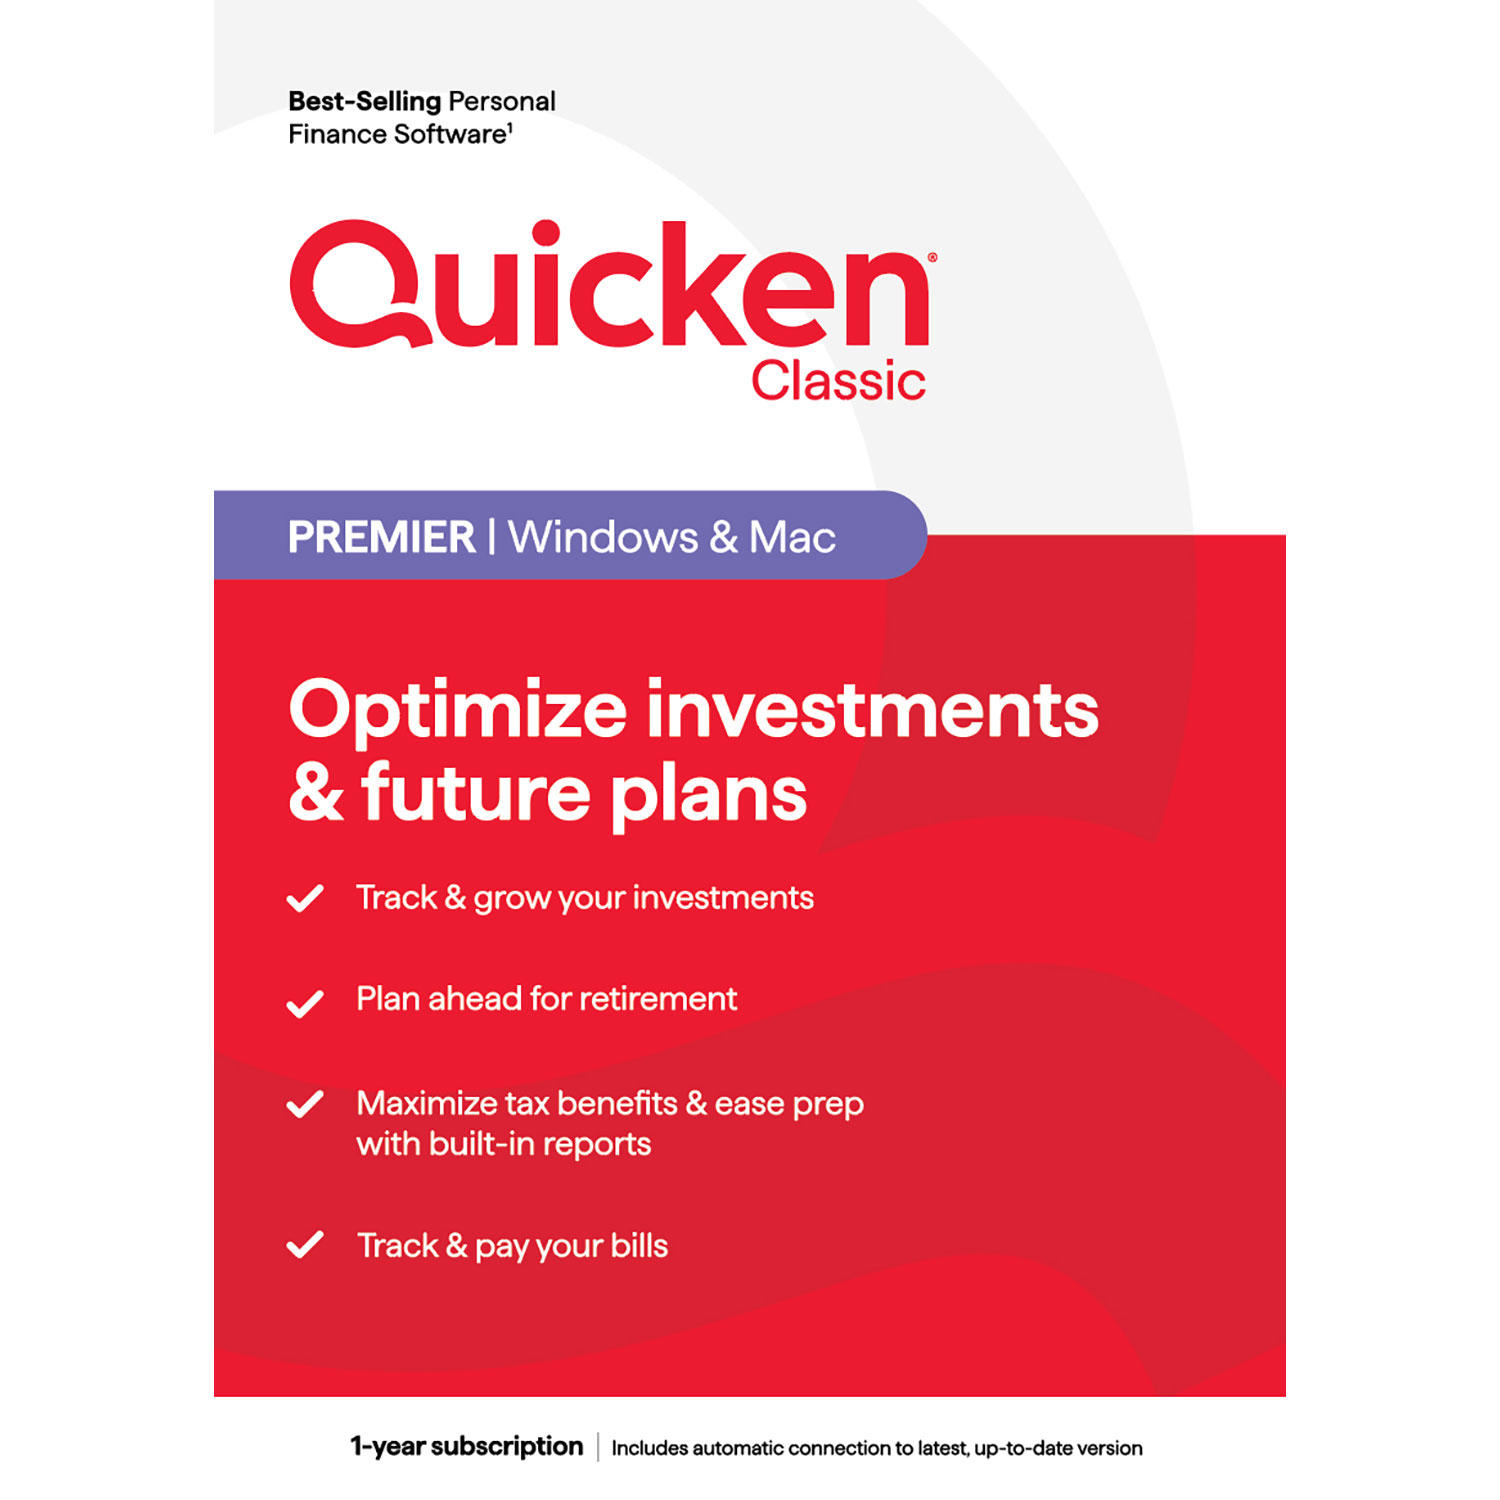 Quicken Premier personal finance software helps you optimize your investments & plan for the future. Try it risk-free